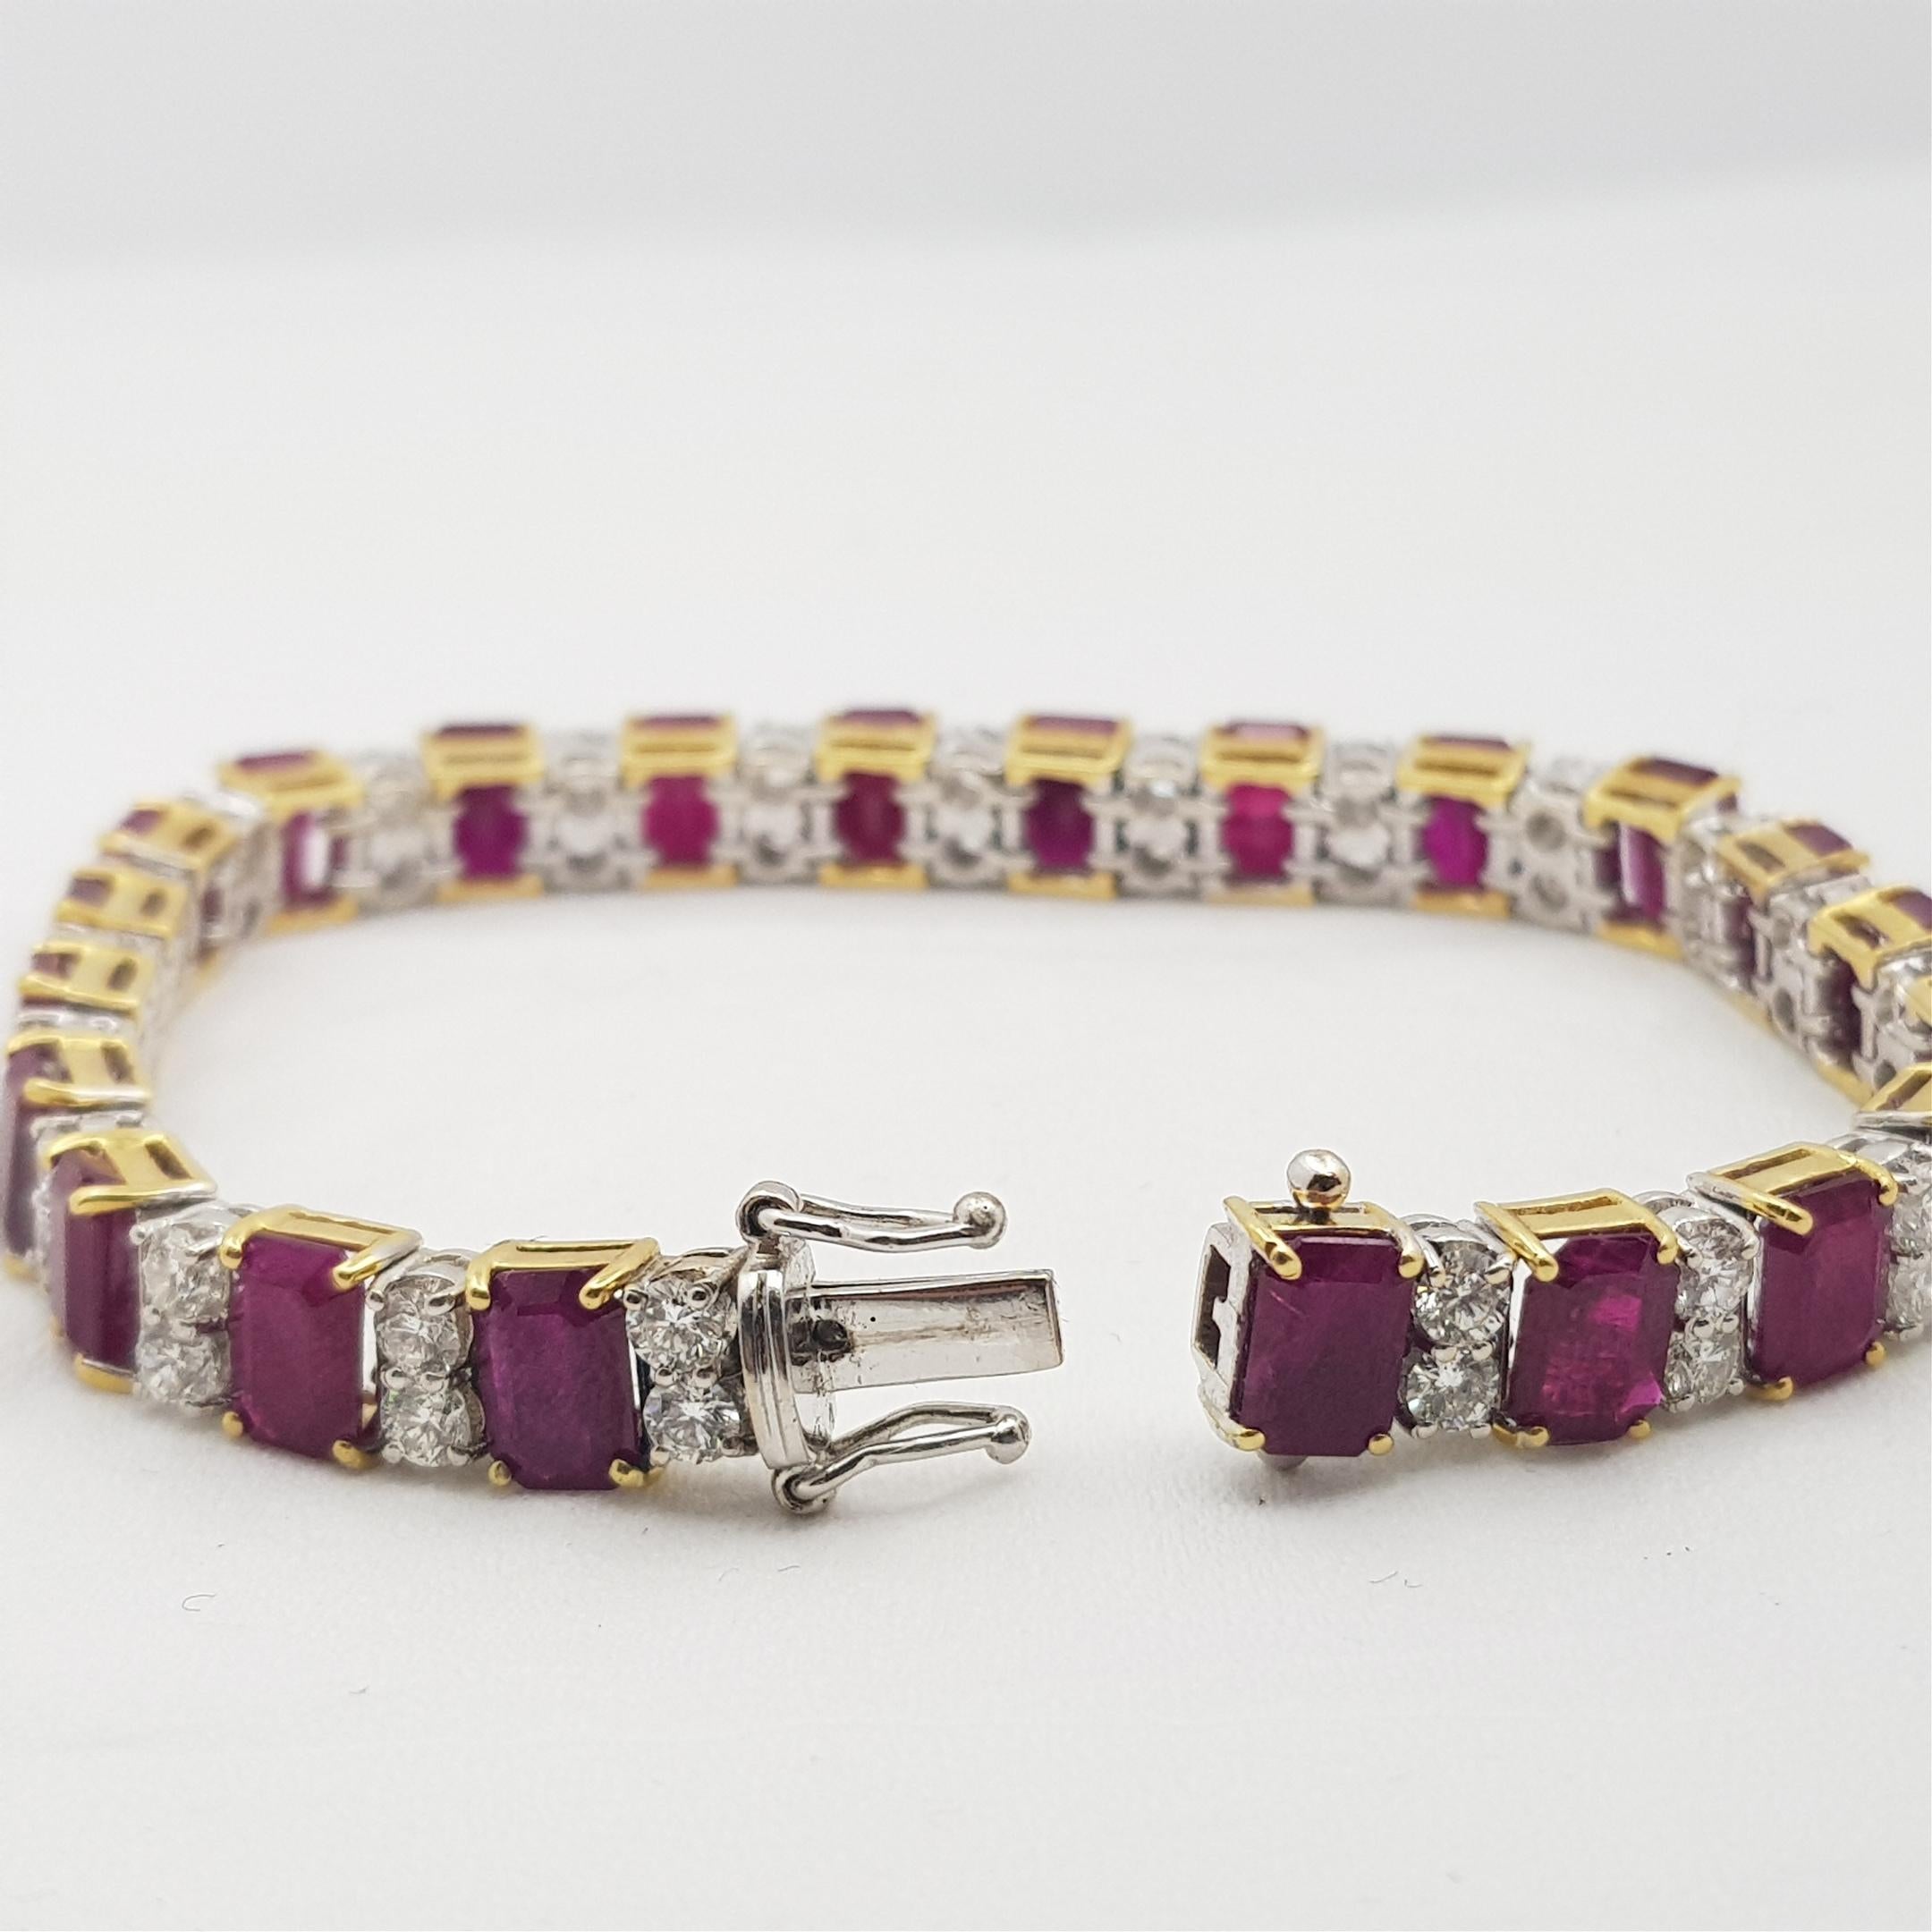 18ct Two Tone Gold Burmese Ruby & 4.5ct TW Diamond Bracelet Val $62765 AUD For Sale 4